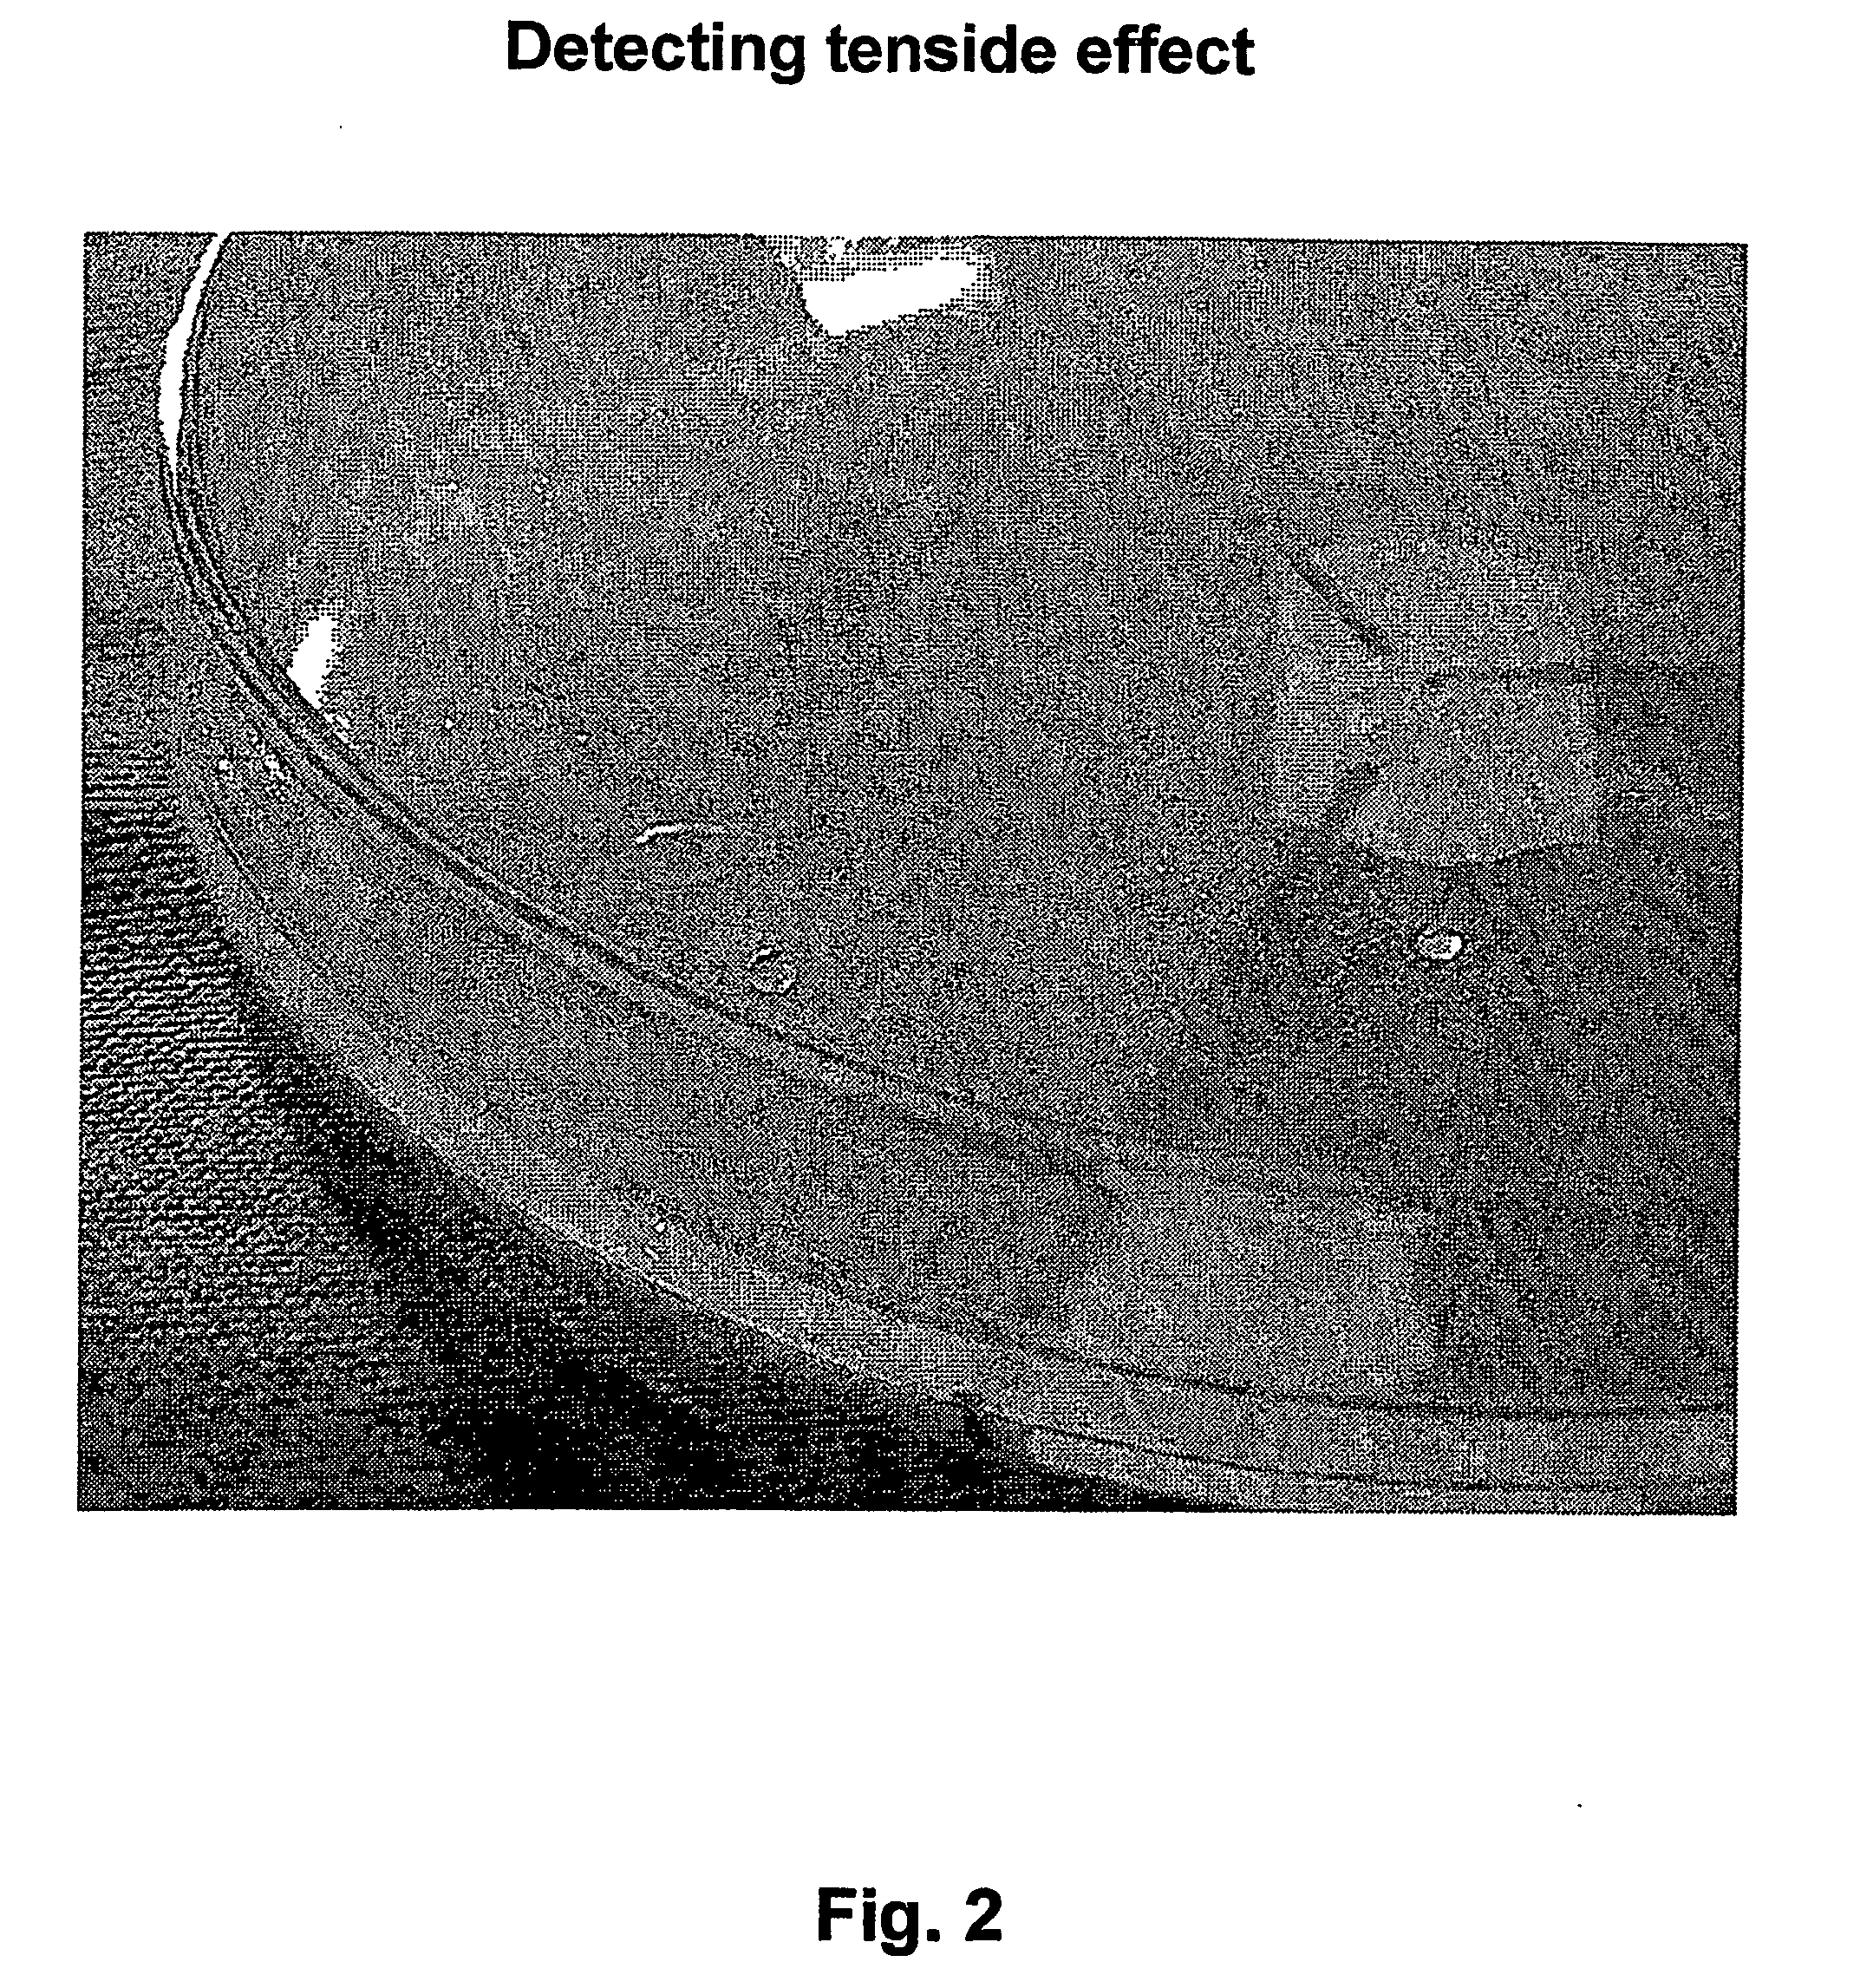 Method for the treatment and prevention of asphaltene-paraffin-vax precipitates in oil-wells, wellheads and pipelines by the use of biocolloid suspensions